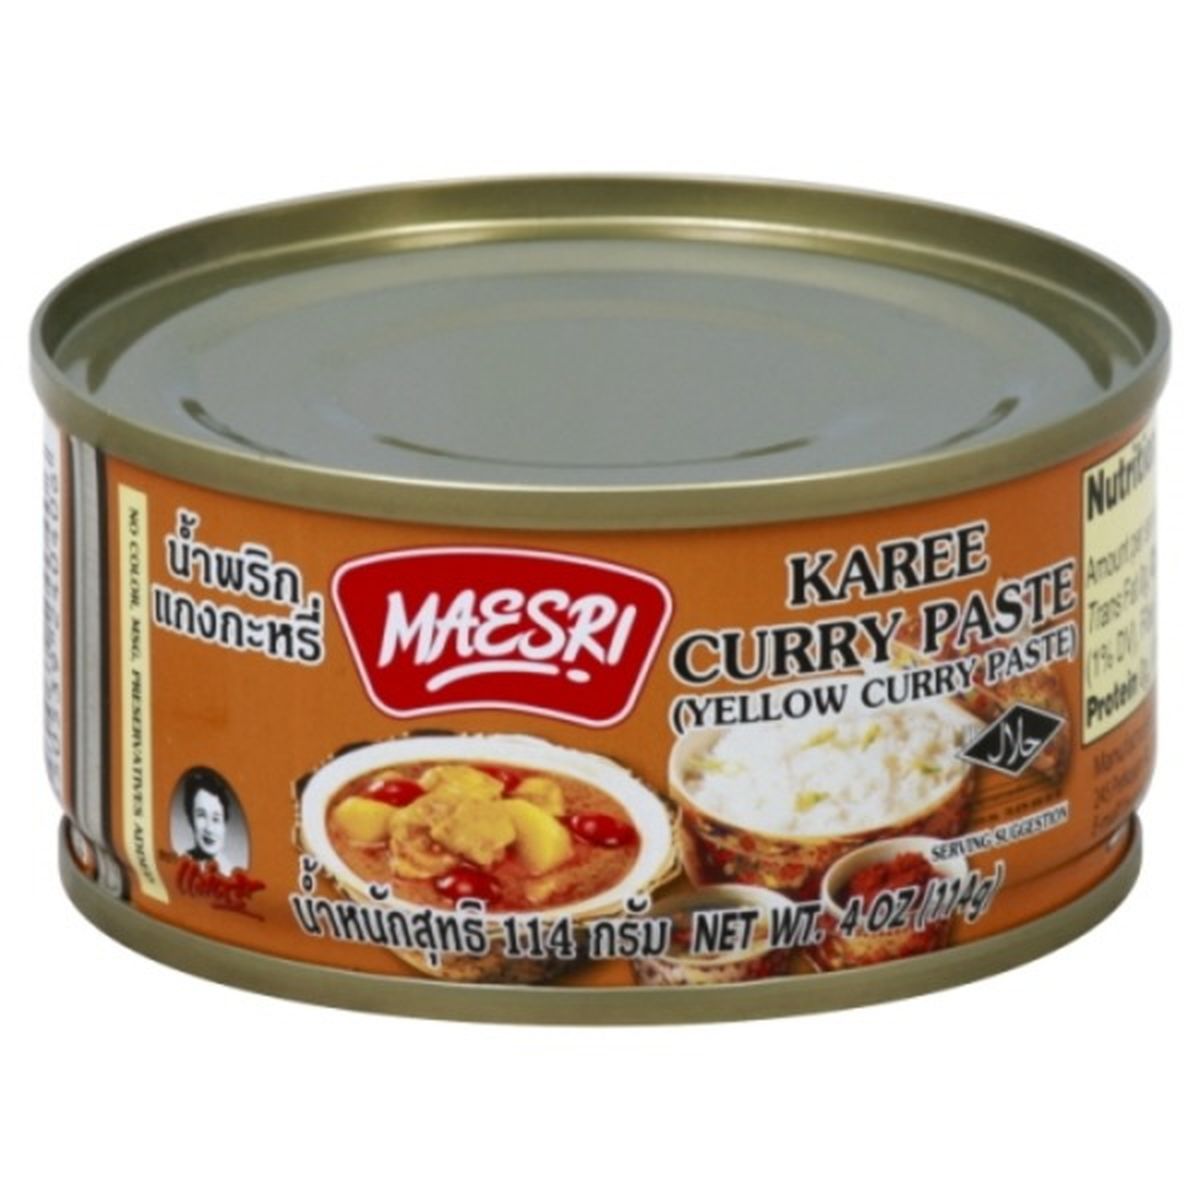 Calories in Maesri Yellow Curry Paste